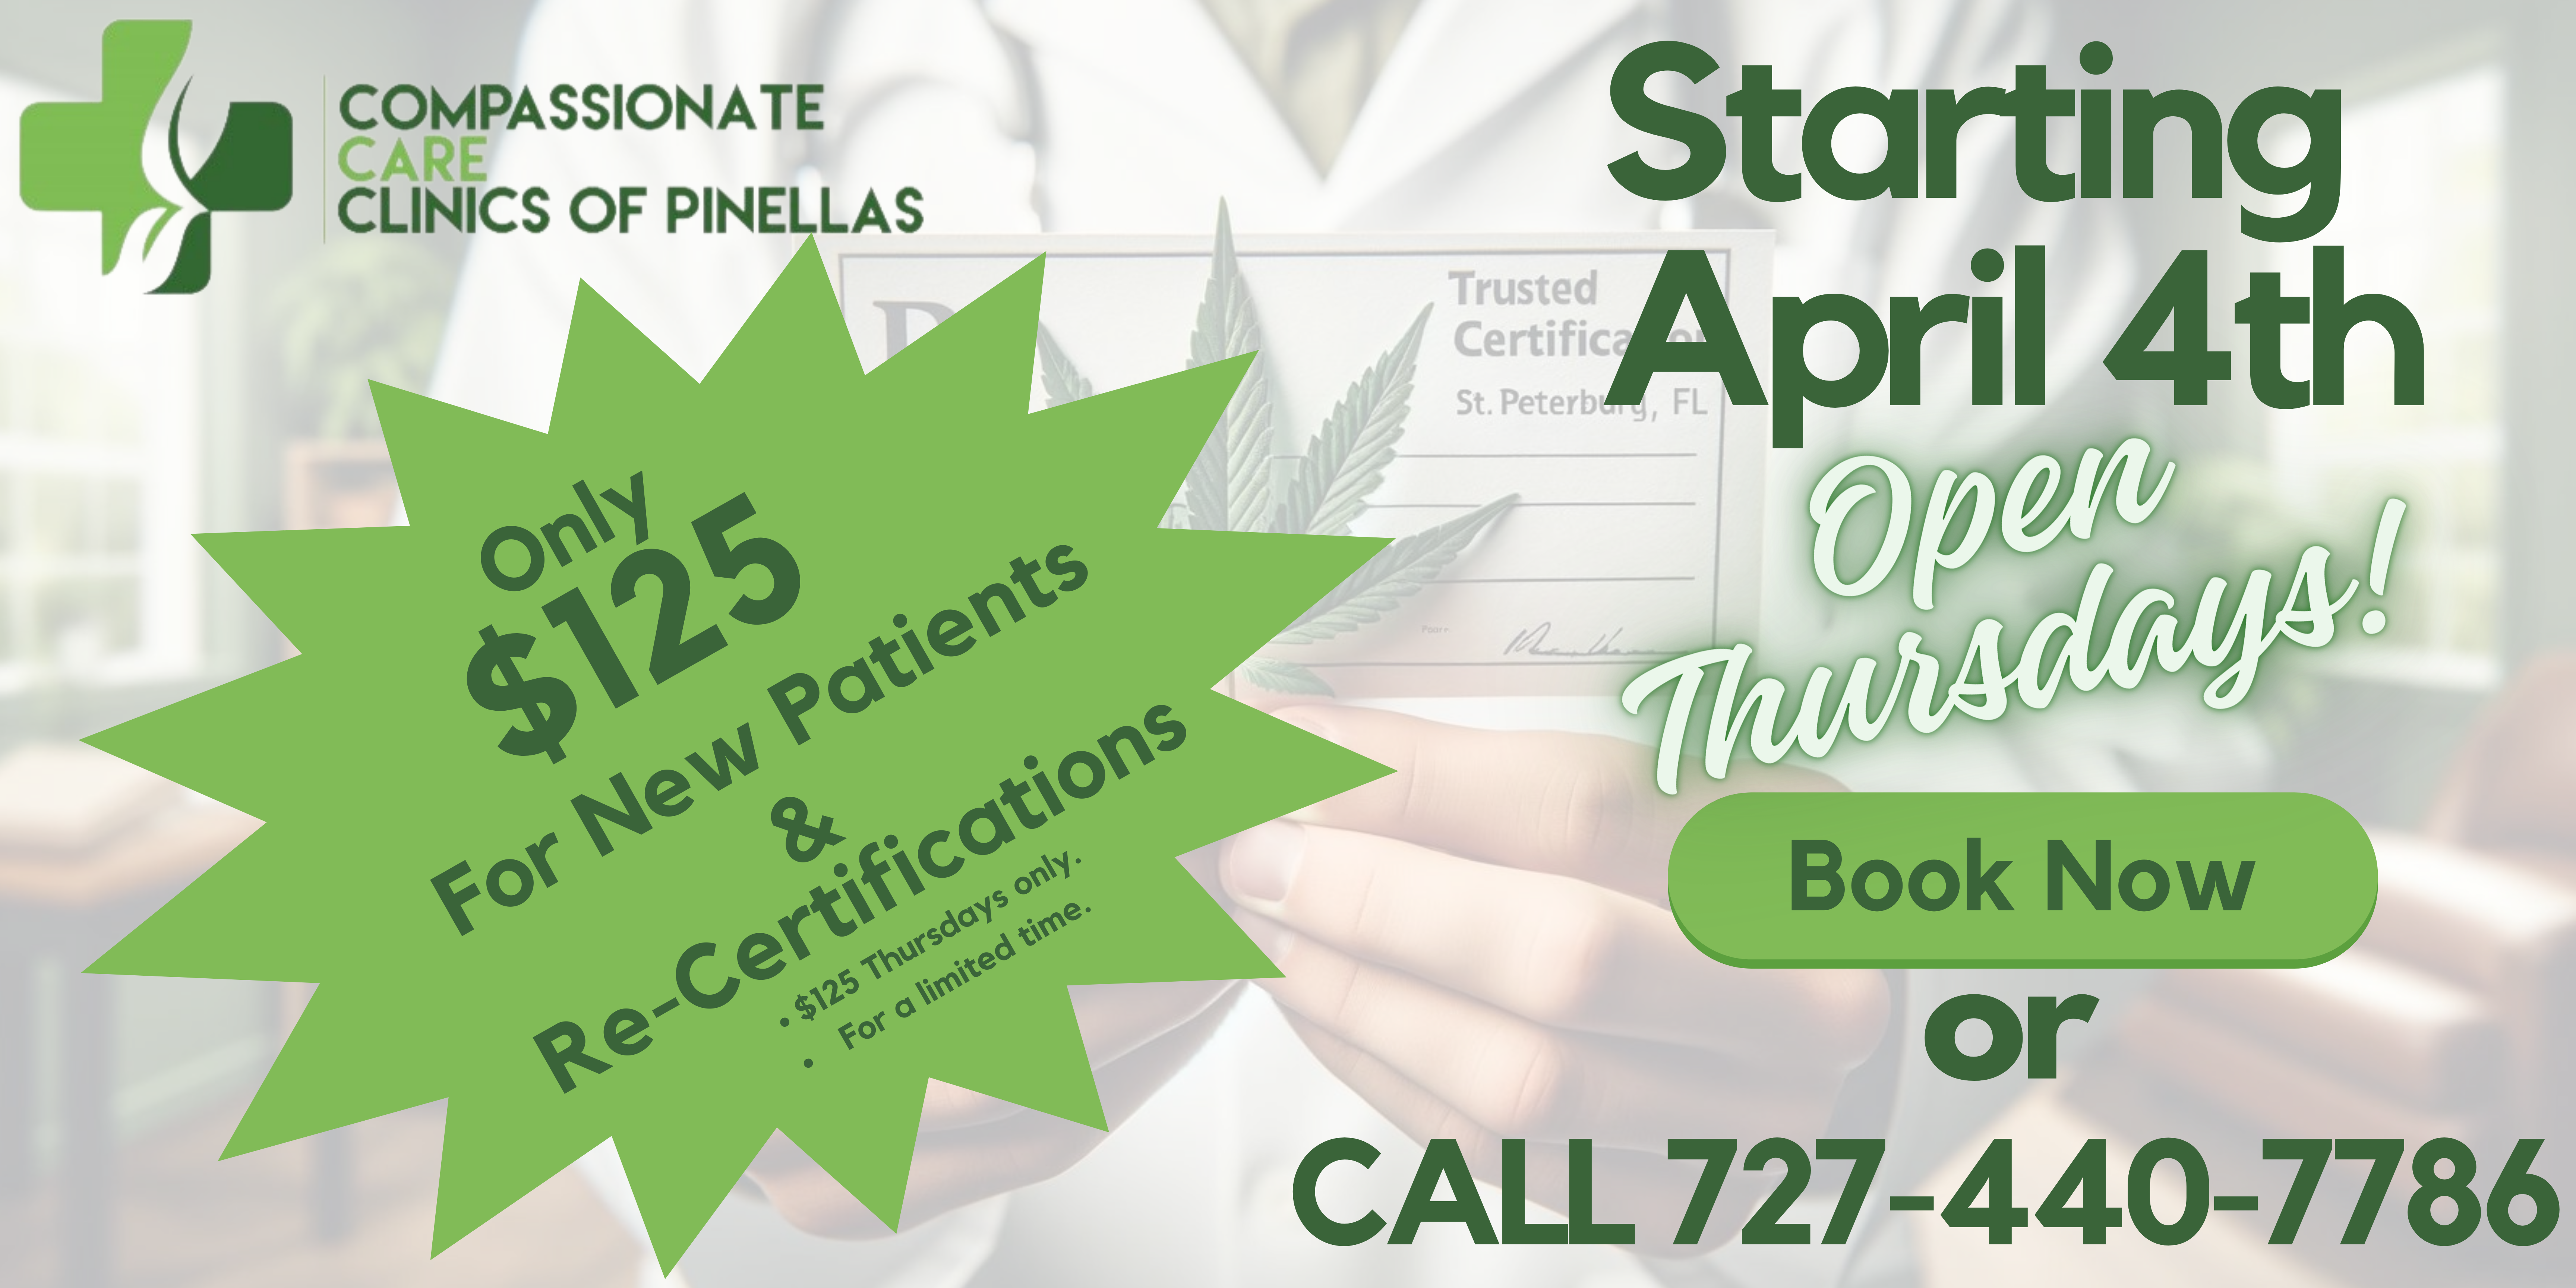 Compassionate Care Clinics of Pinellas - Thursday Special